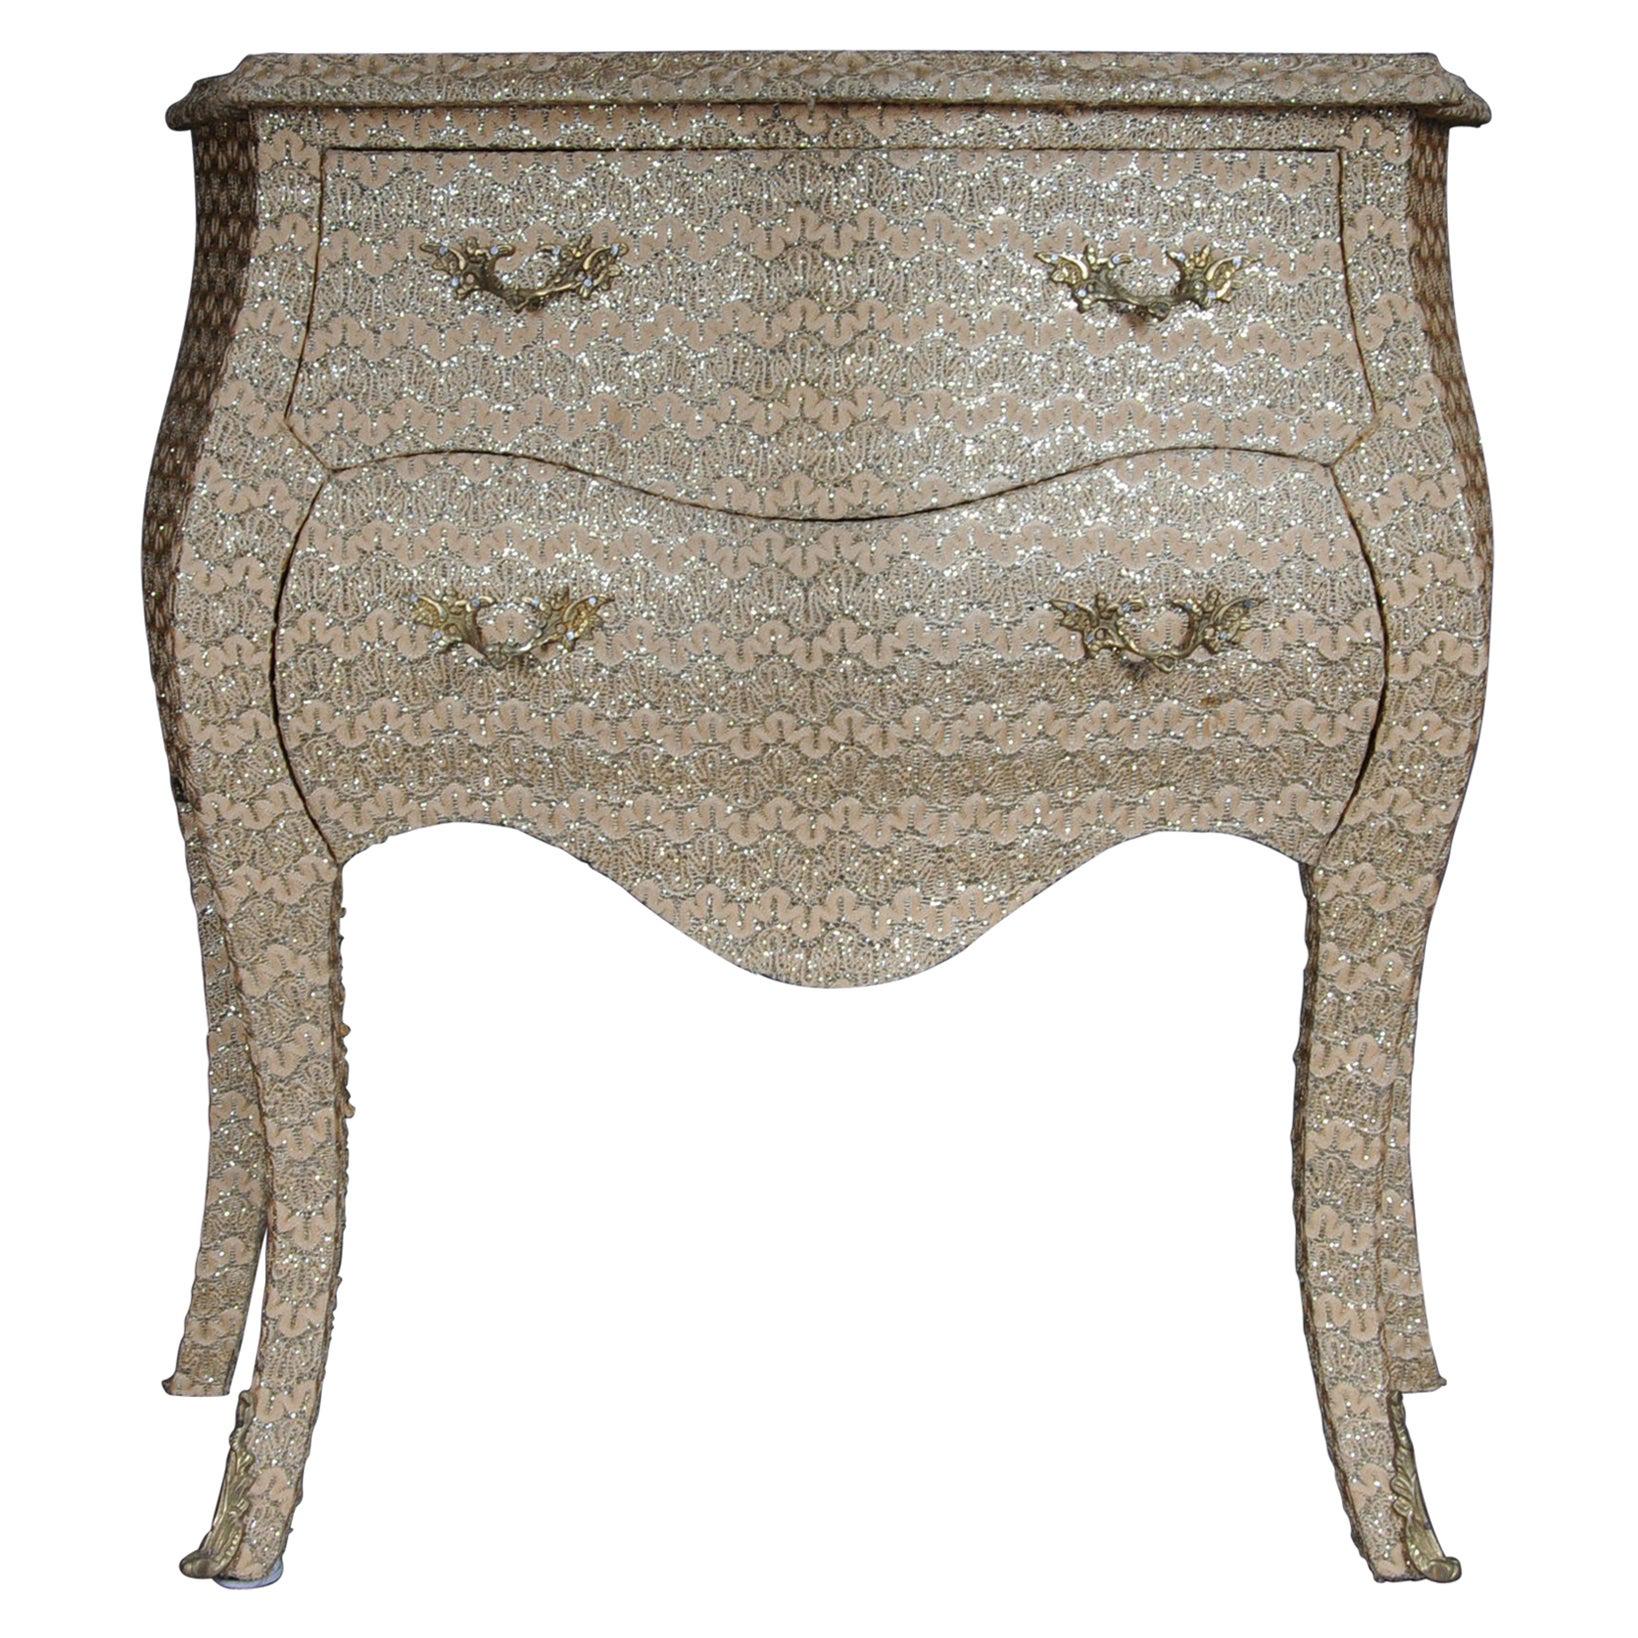 Extravagant Golden Baroque Designer Chest of Drawers with Fabric Cover